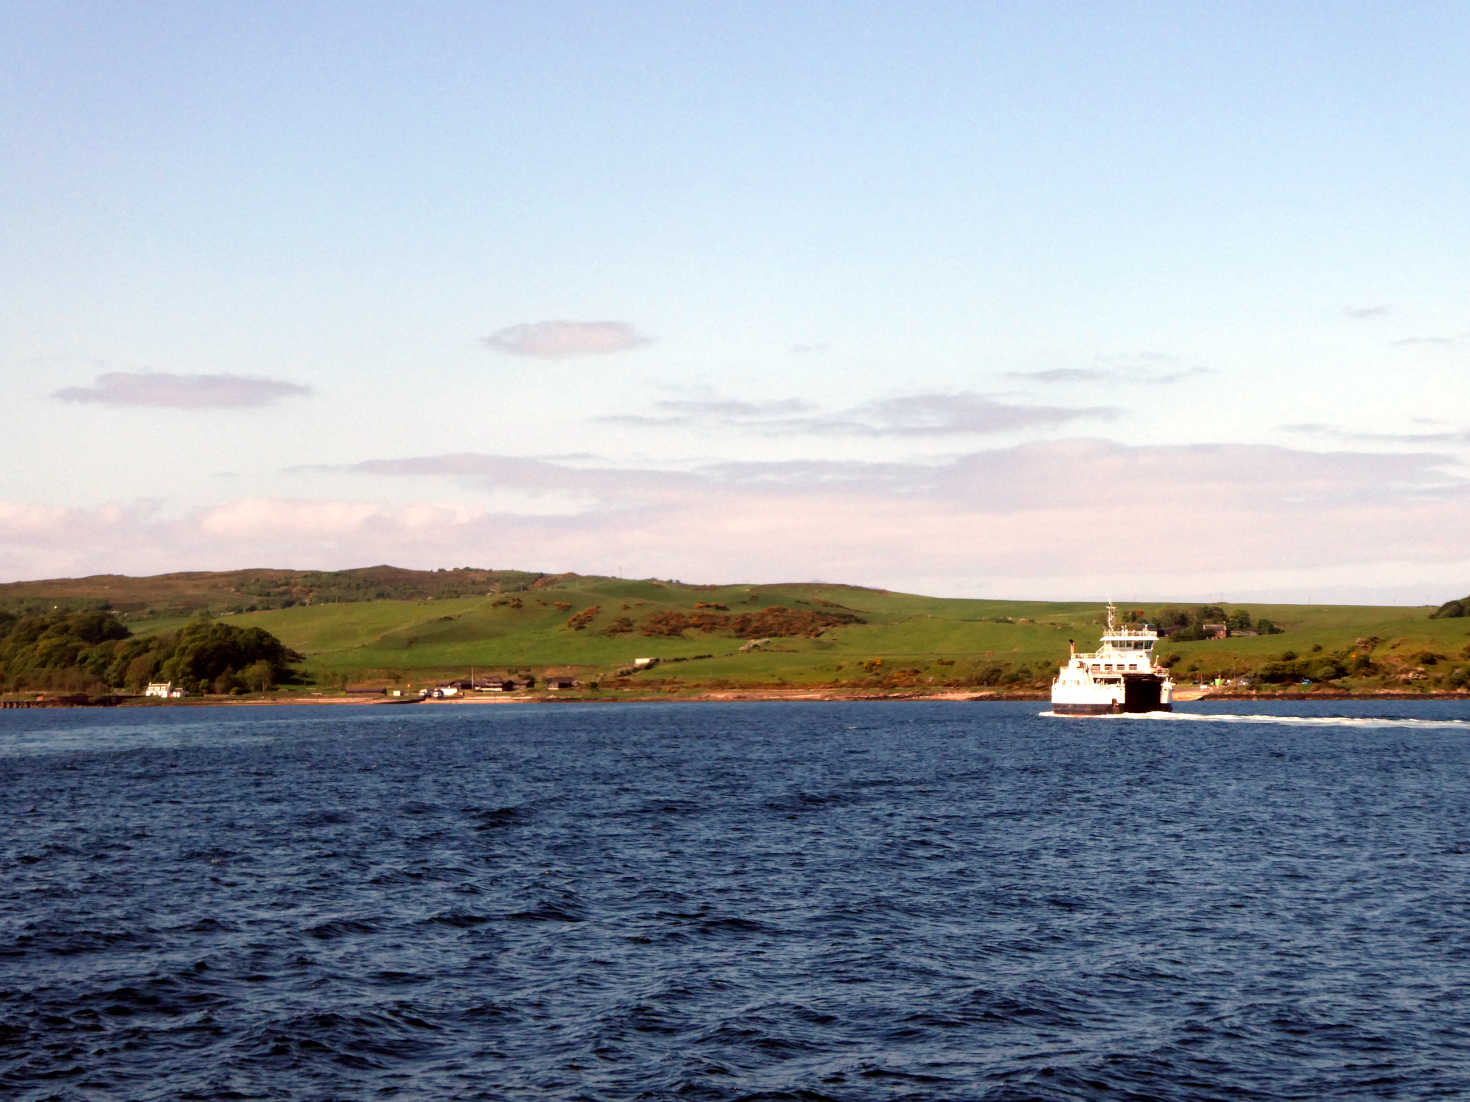 the MV Loch Shira going to Cumbrae